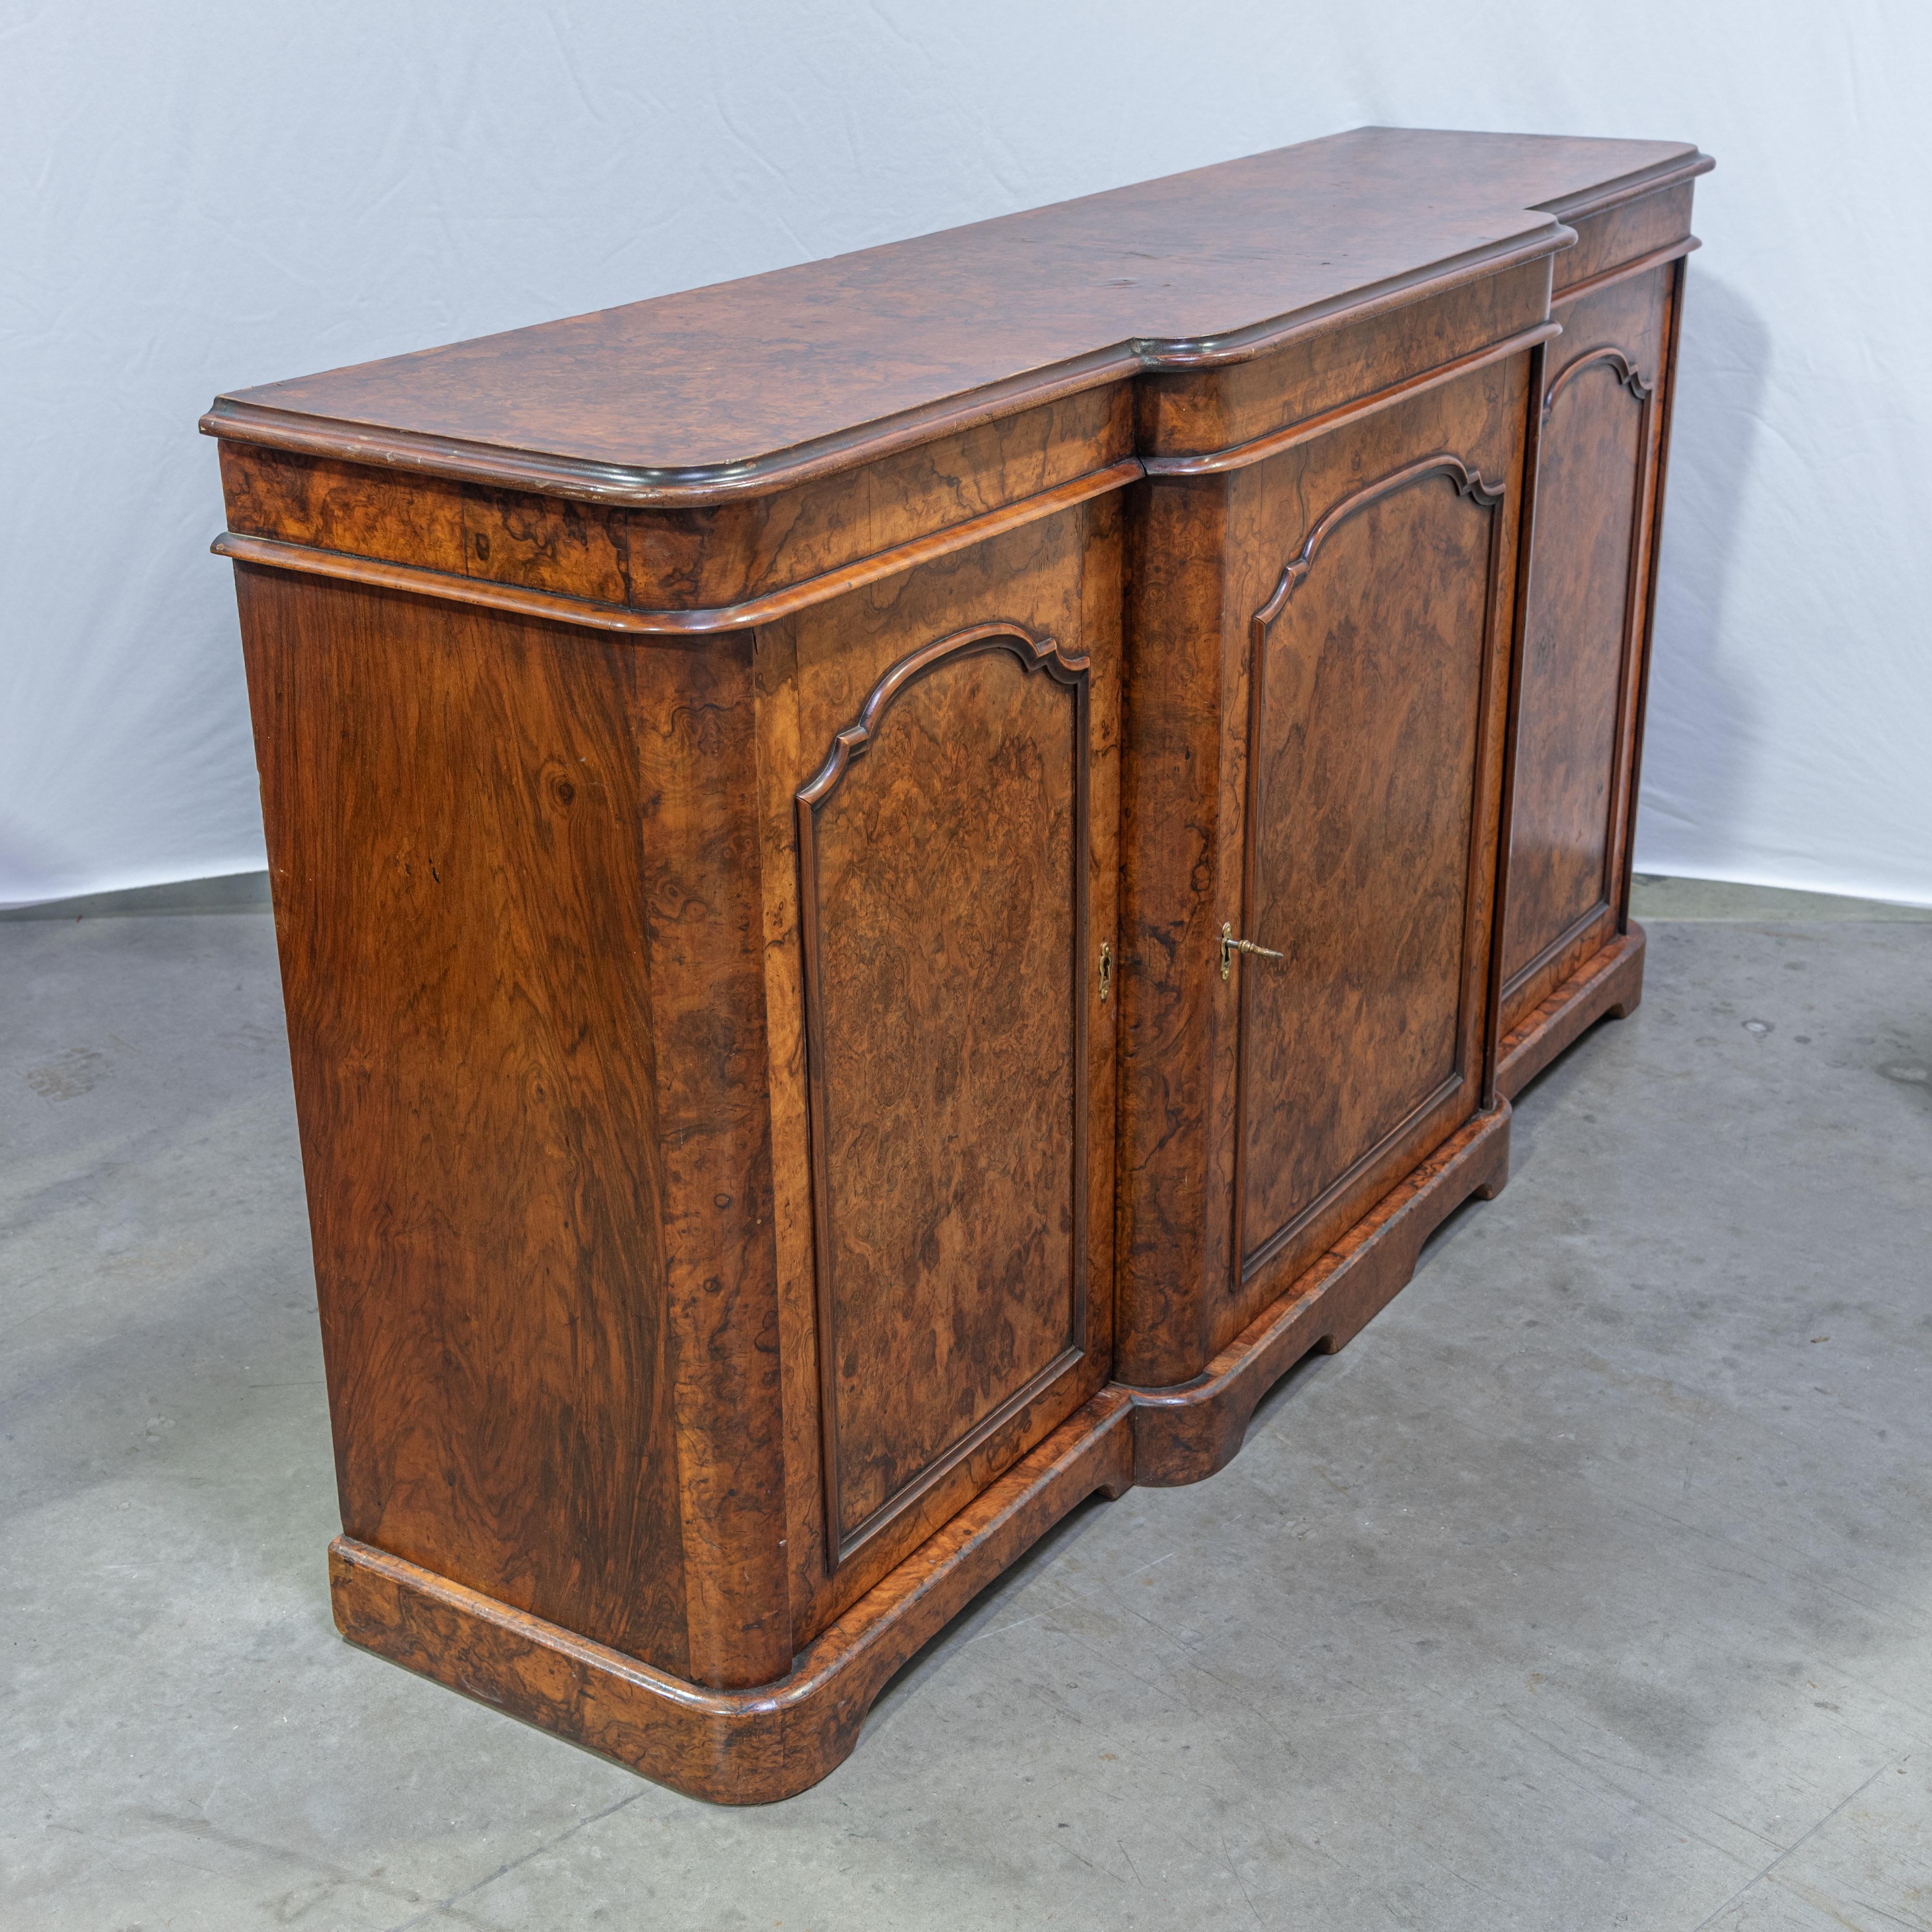 19th Century French Louis XIV Burl Walnut Sideboard In Good Condition For Sale In San Antonio, TX